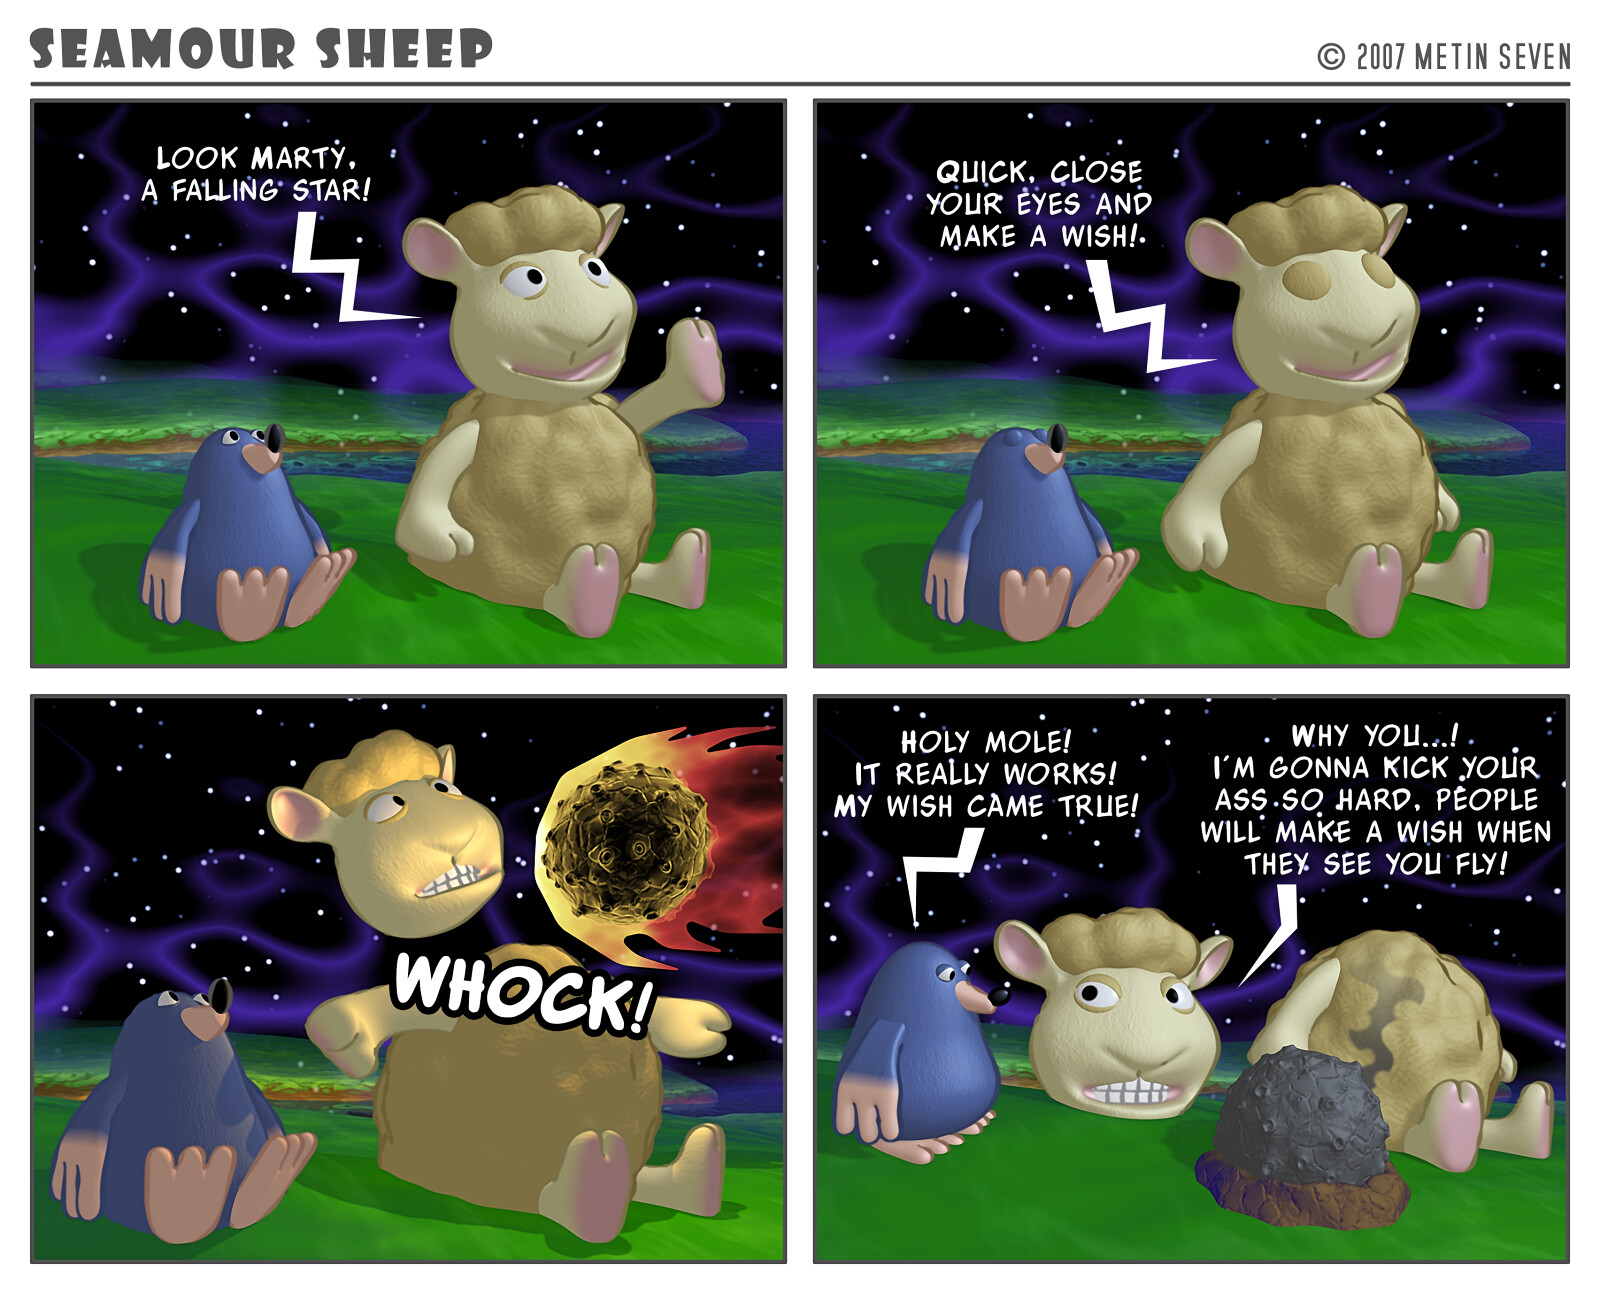 Seamour Sheep and Marty Mole comic strip episode: Wish